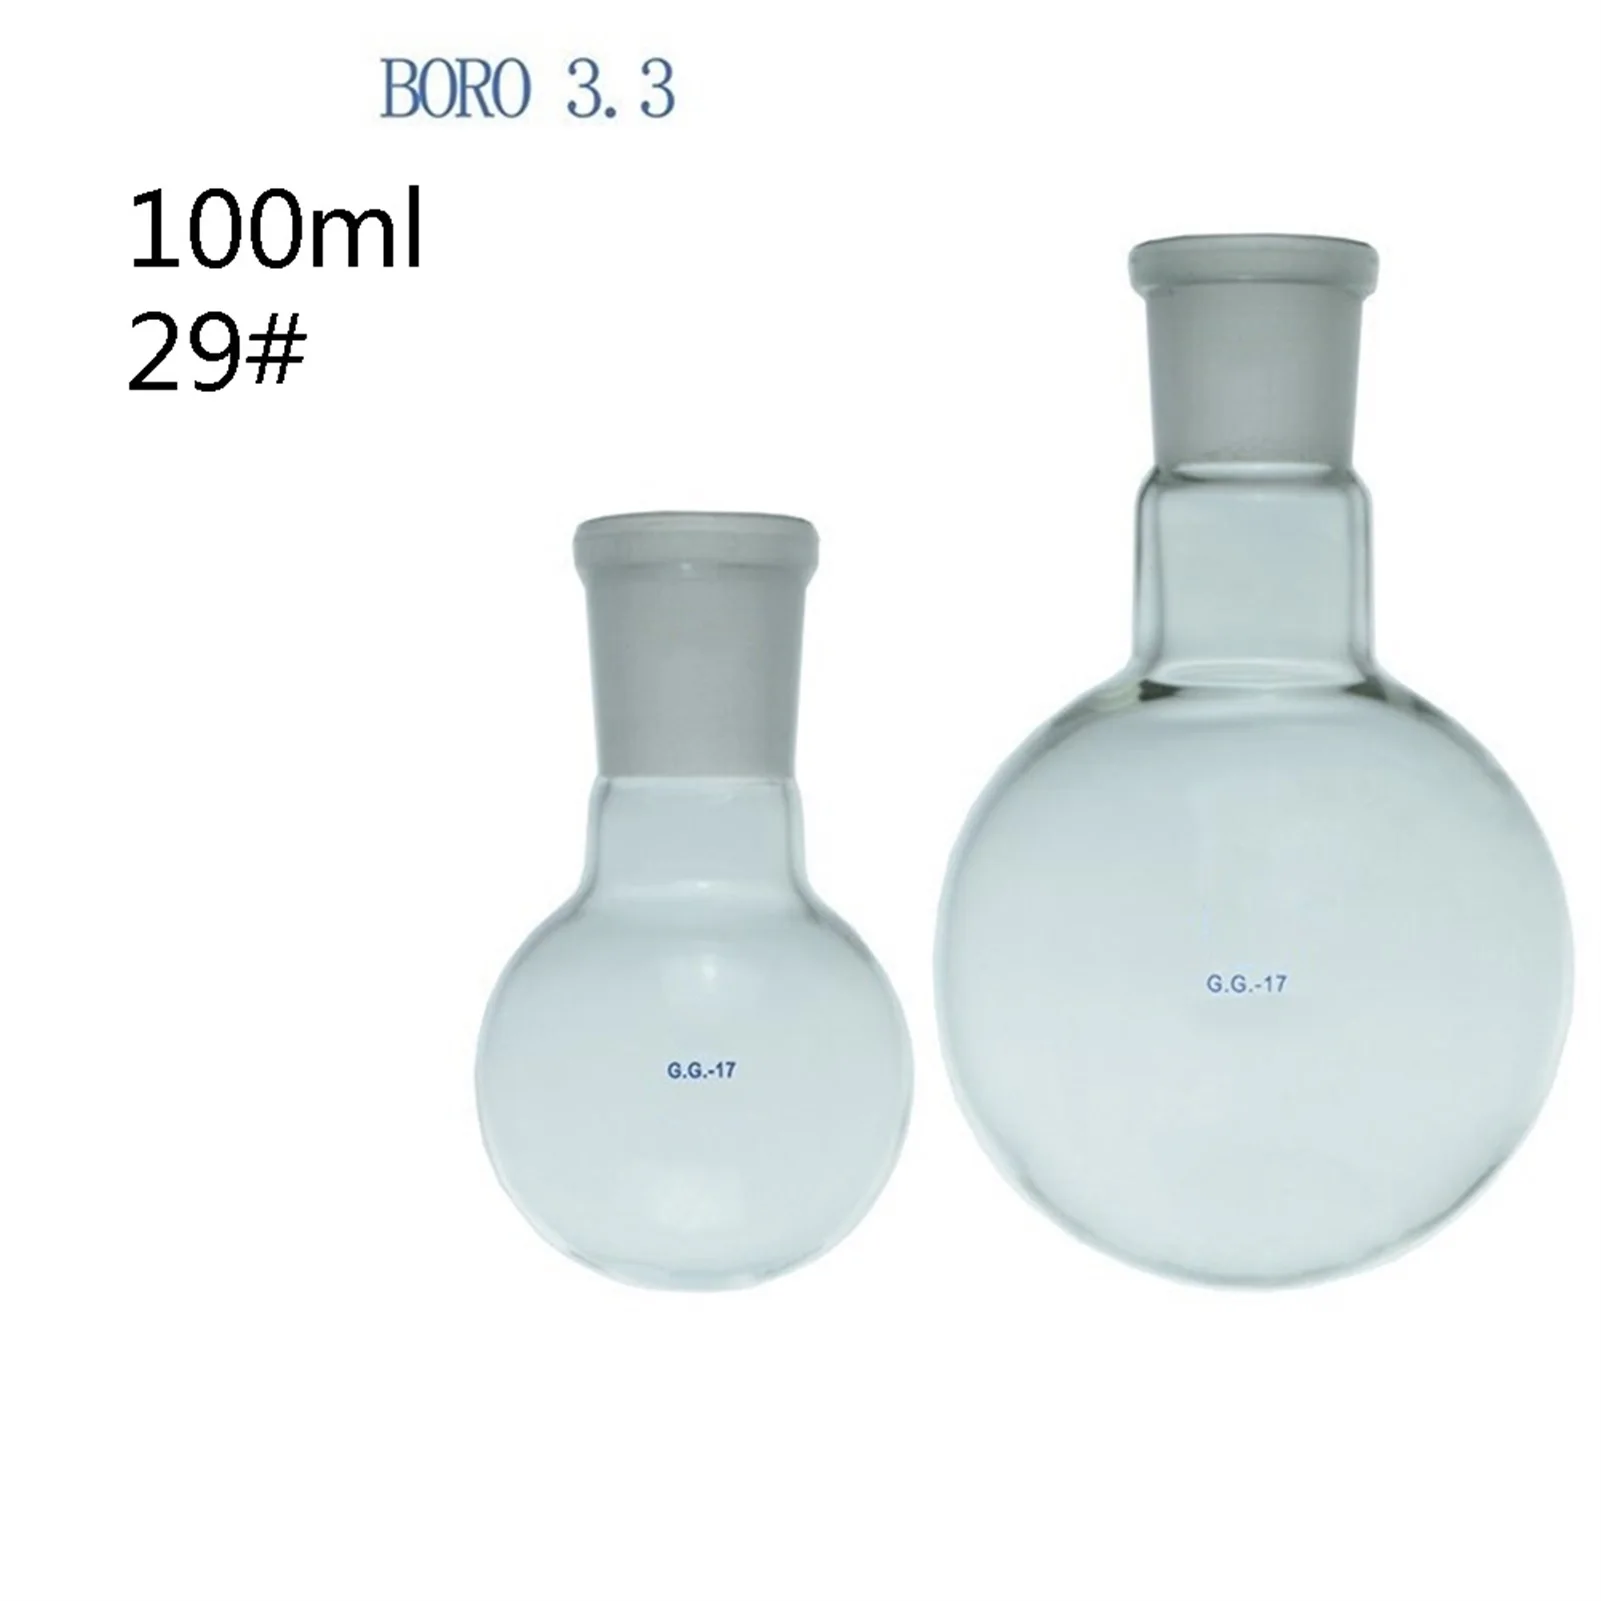 

100ml Boiling Flask Round Bottom 29# Ground Mouth Borosilicate 3.3 Glass Heat Resistant Lab Distilling Flasks- Pack Of 1